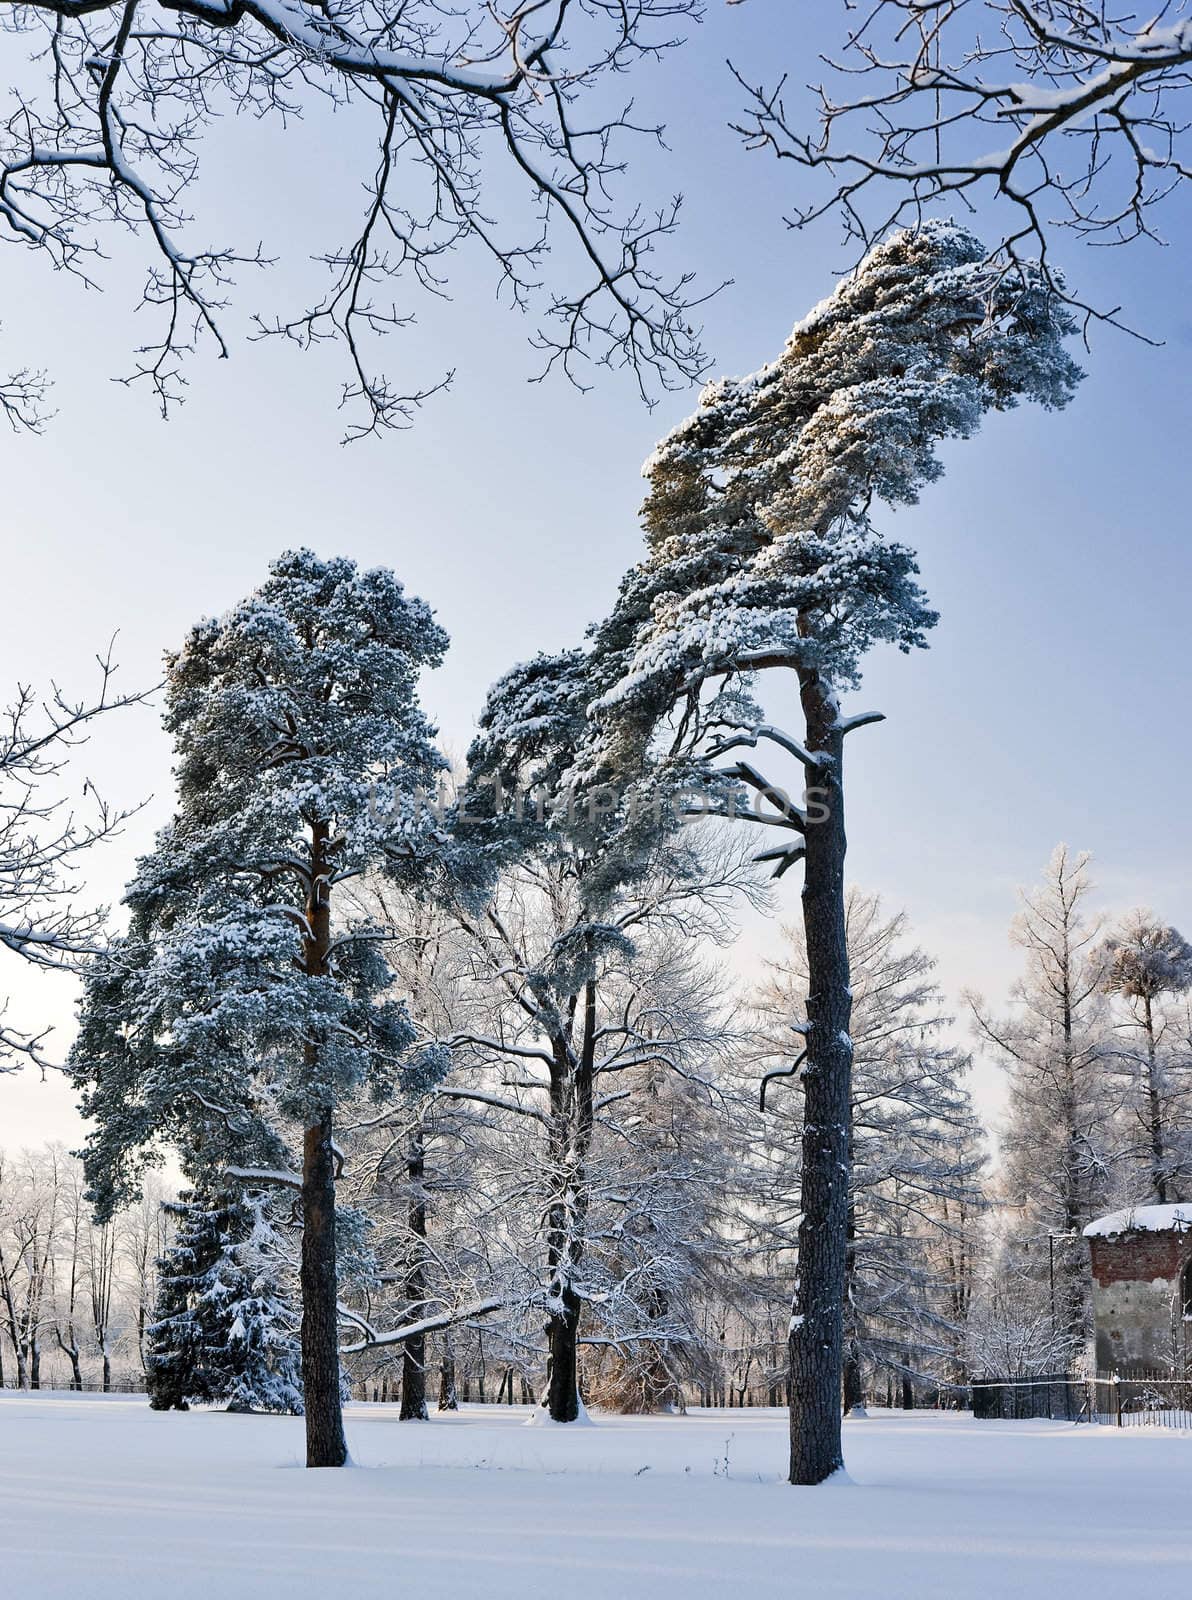 Pine trees in winter park by mulden